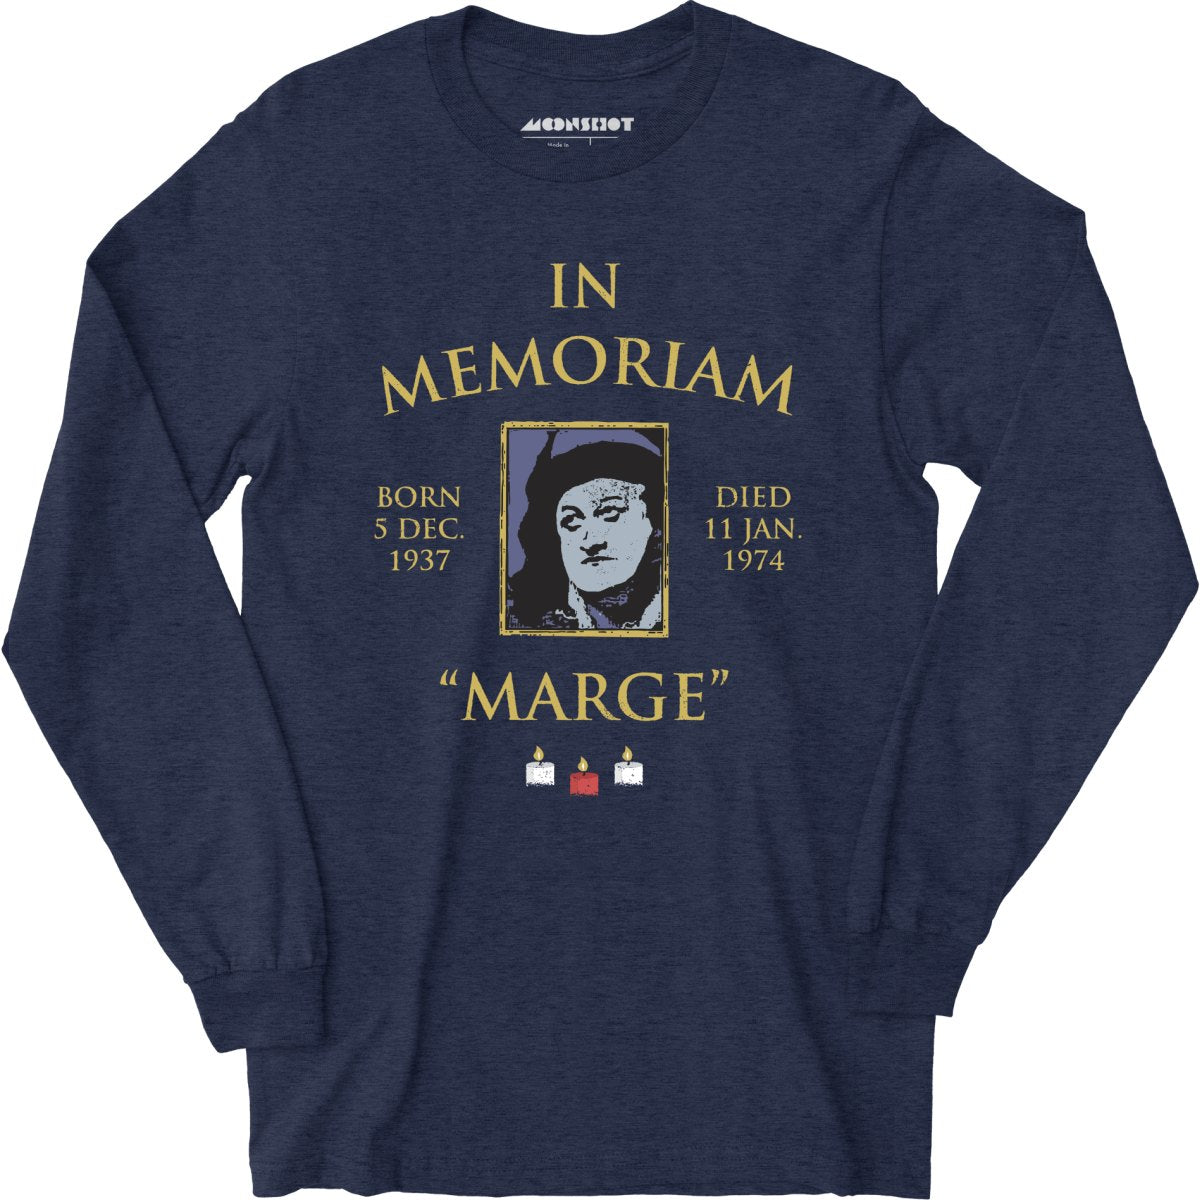 Large Marge in Memoriam - Long Sleeve T-Shirt